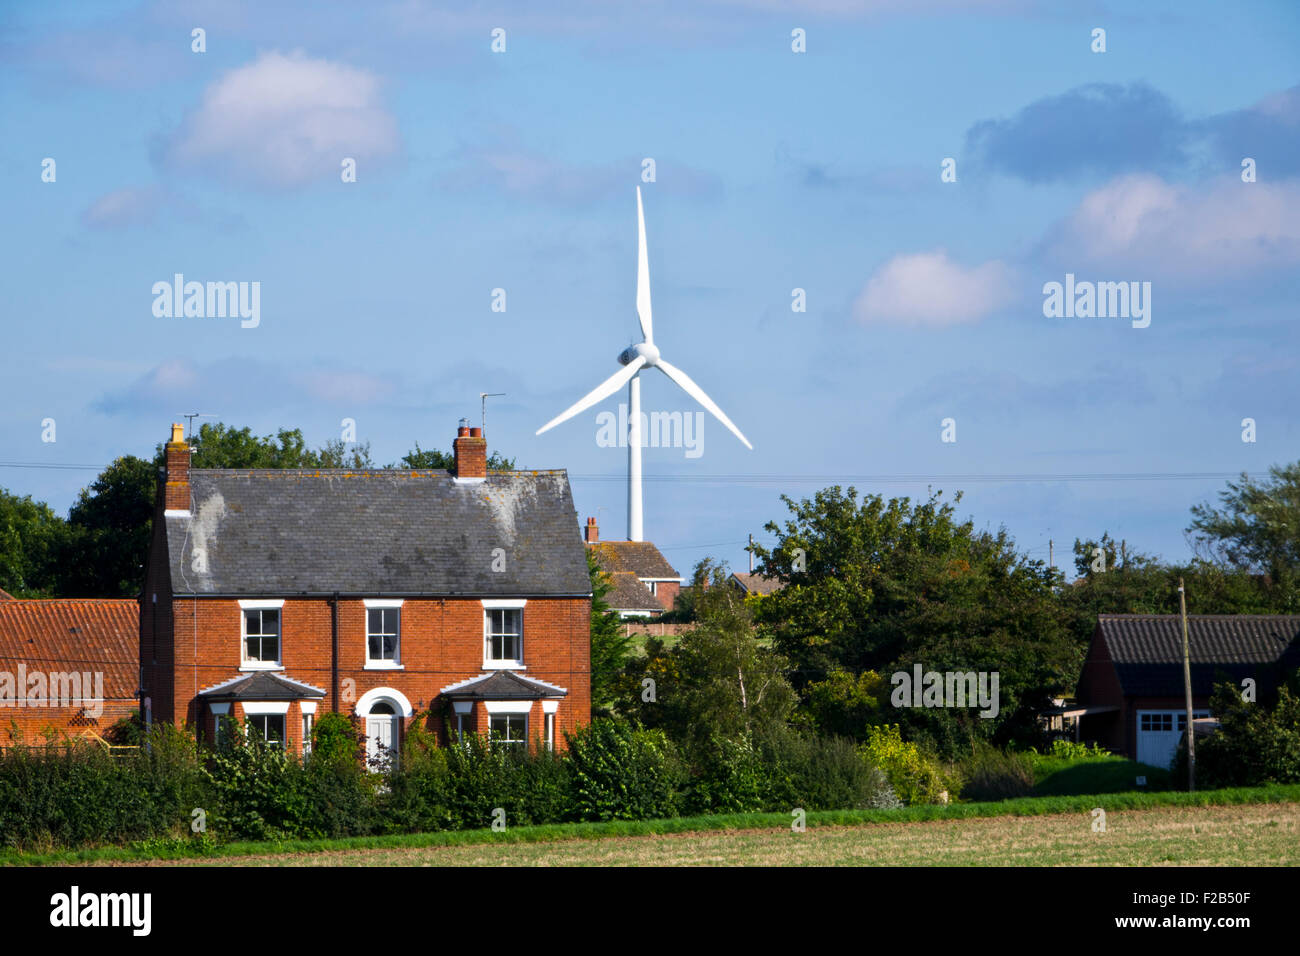 wind turbine and house in countryside Stock Photo